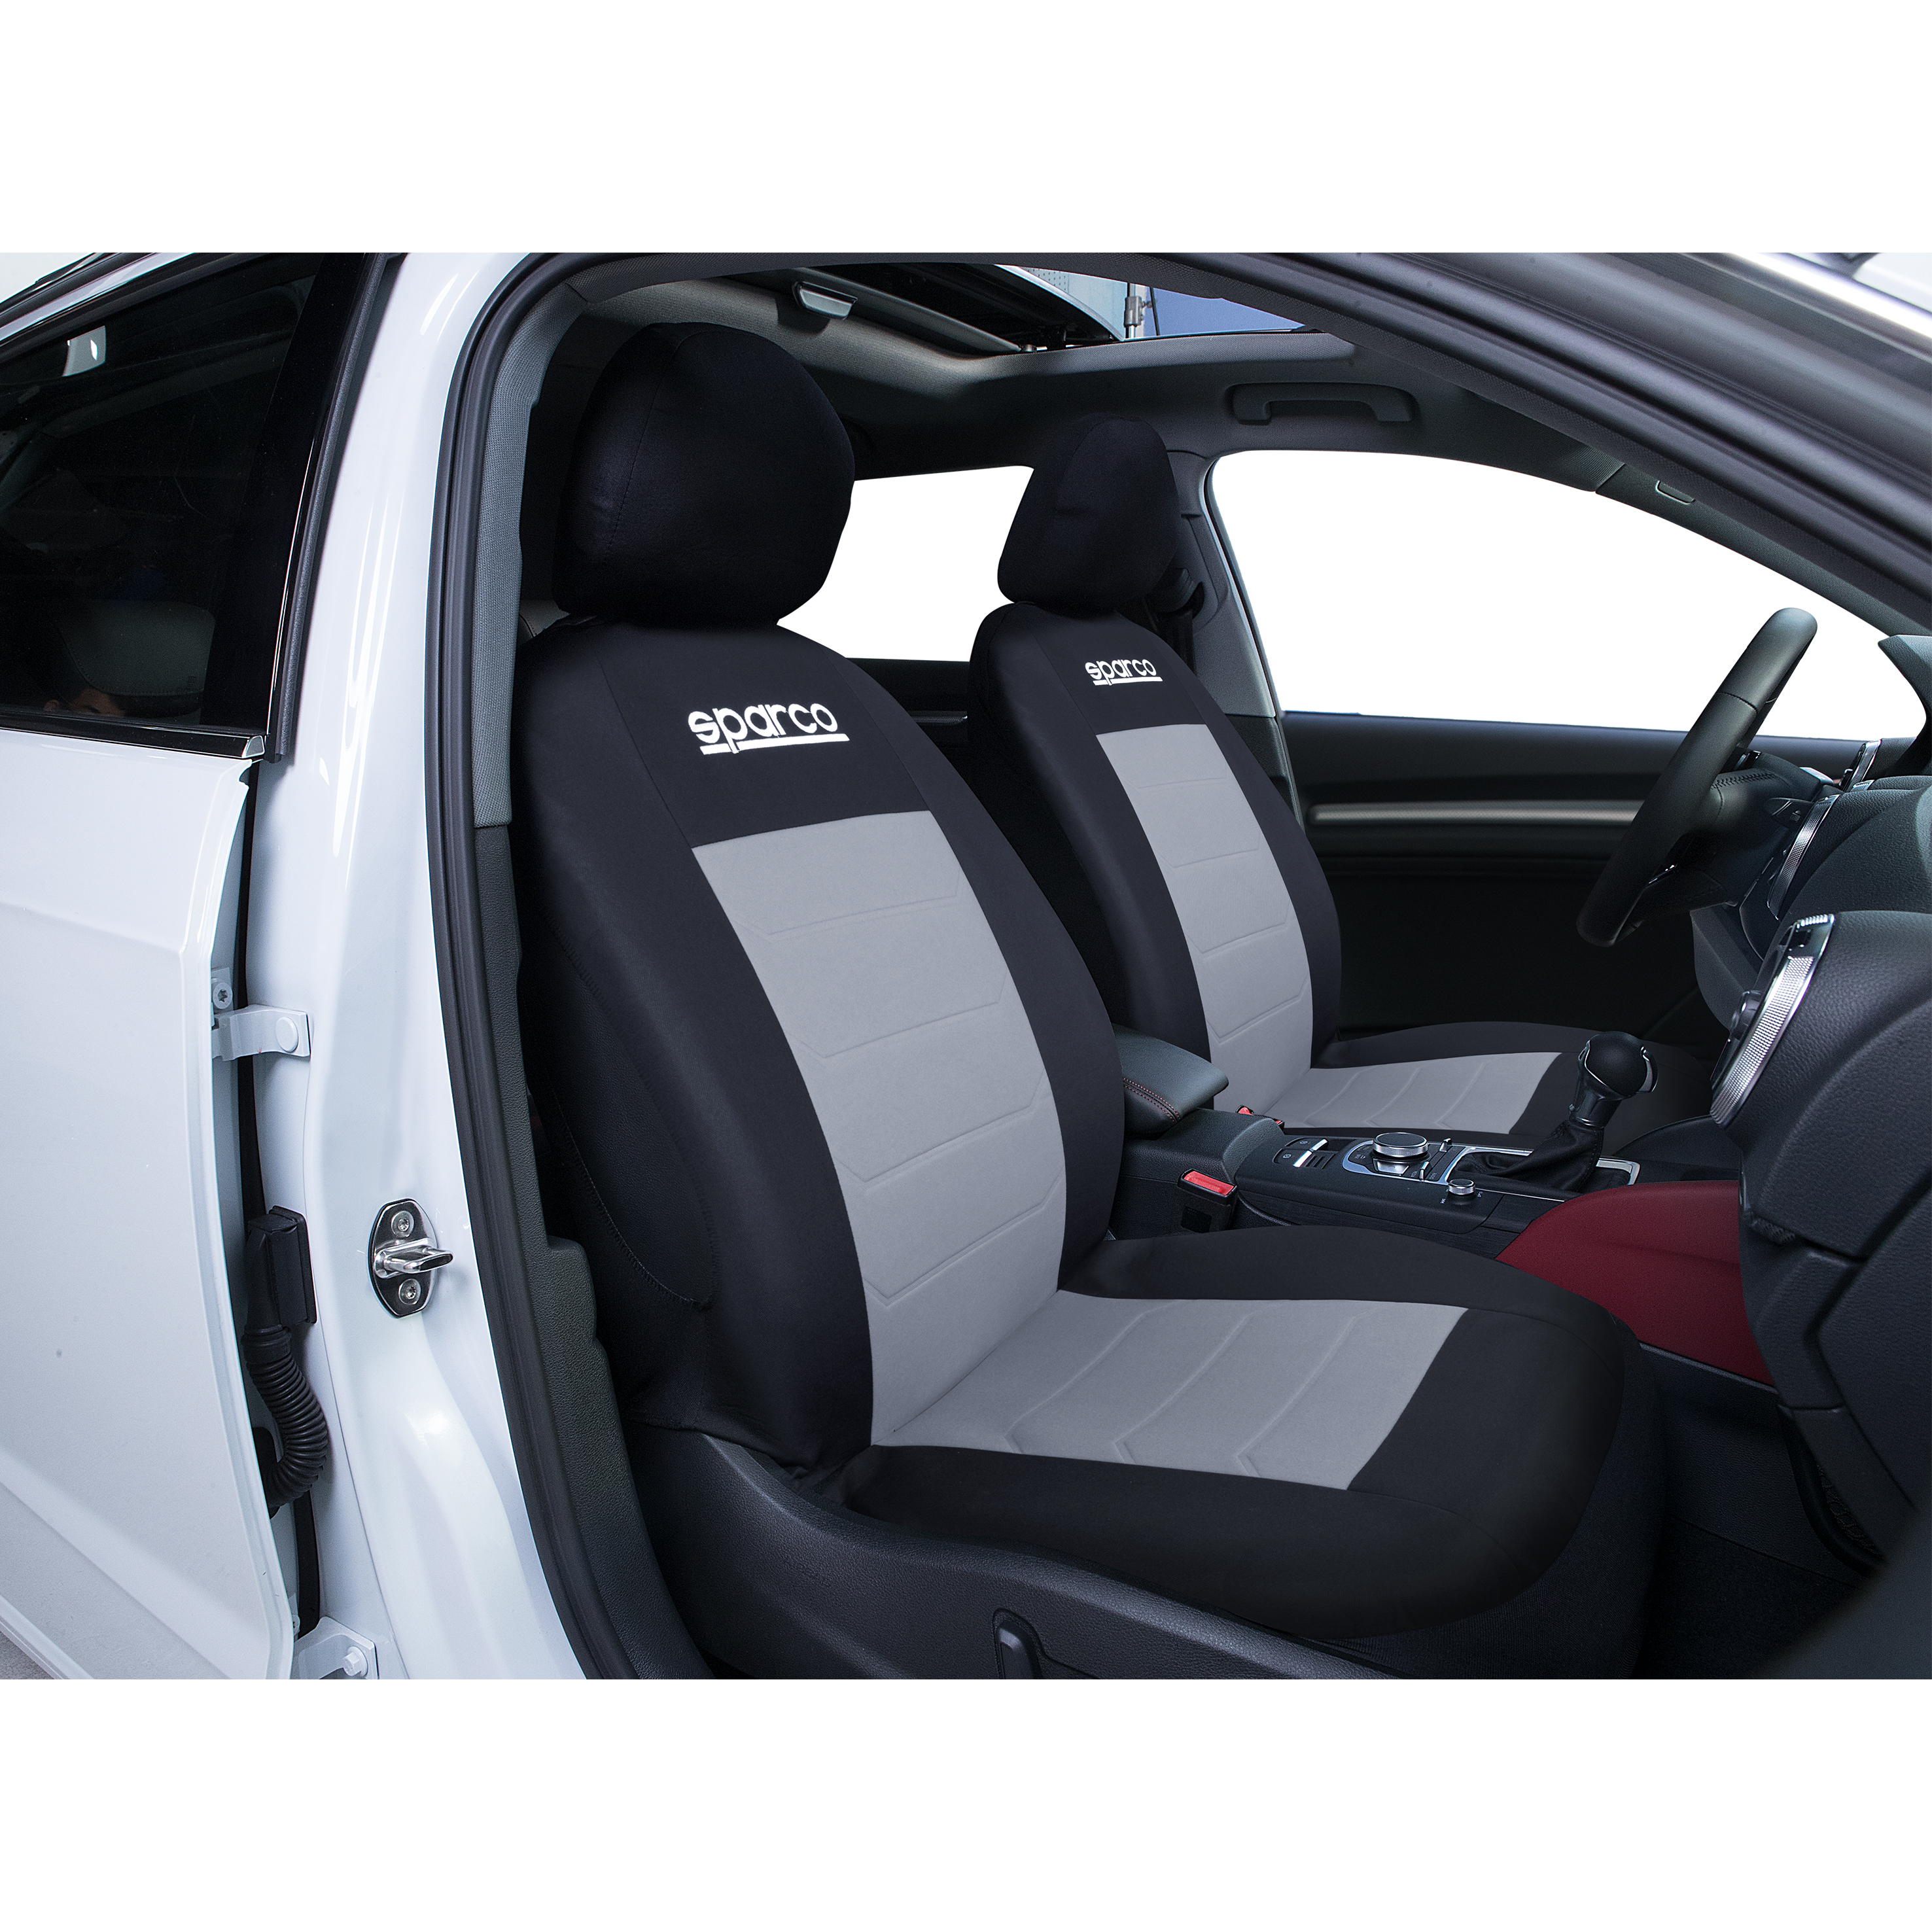 SPARCO SEAT COVER DUO BLUE/ GREY